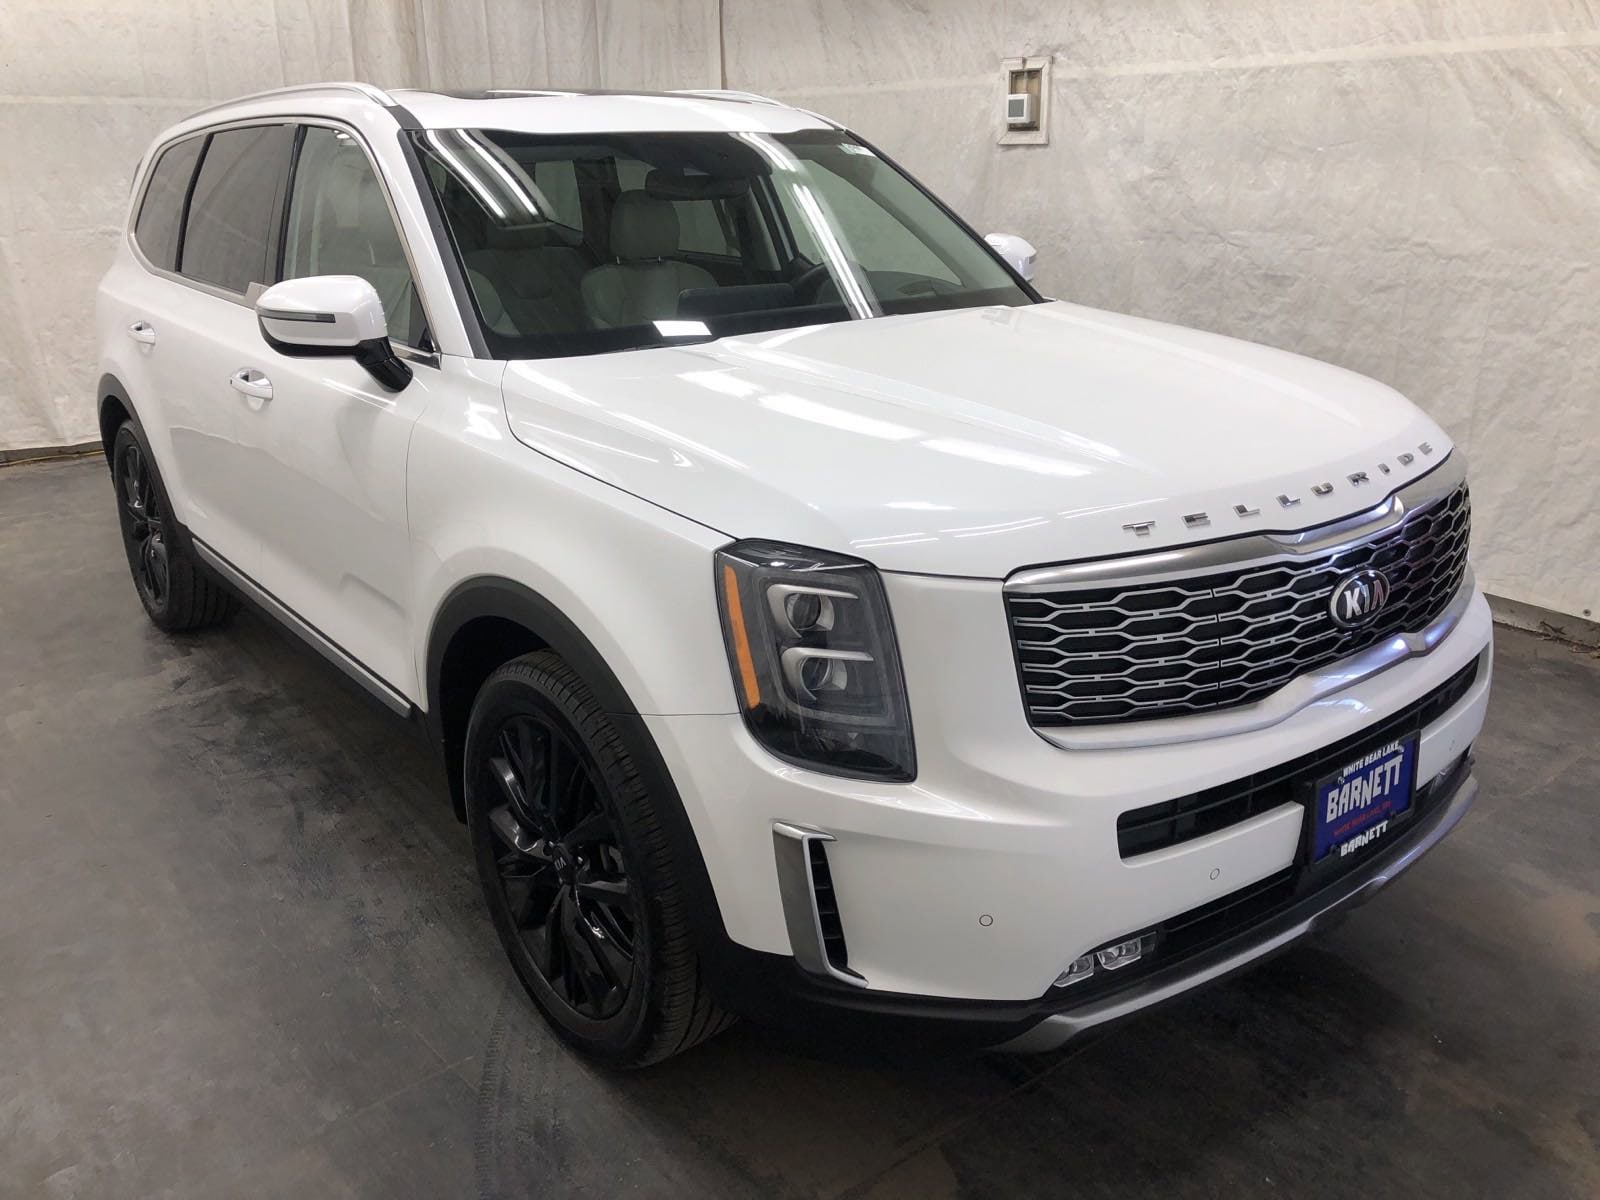 Used 2020 Kia Telluride SX with VIN 5XYP5DHC7LG071779 for sale in White Bear Lake, Minnesota